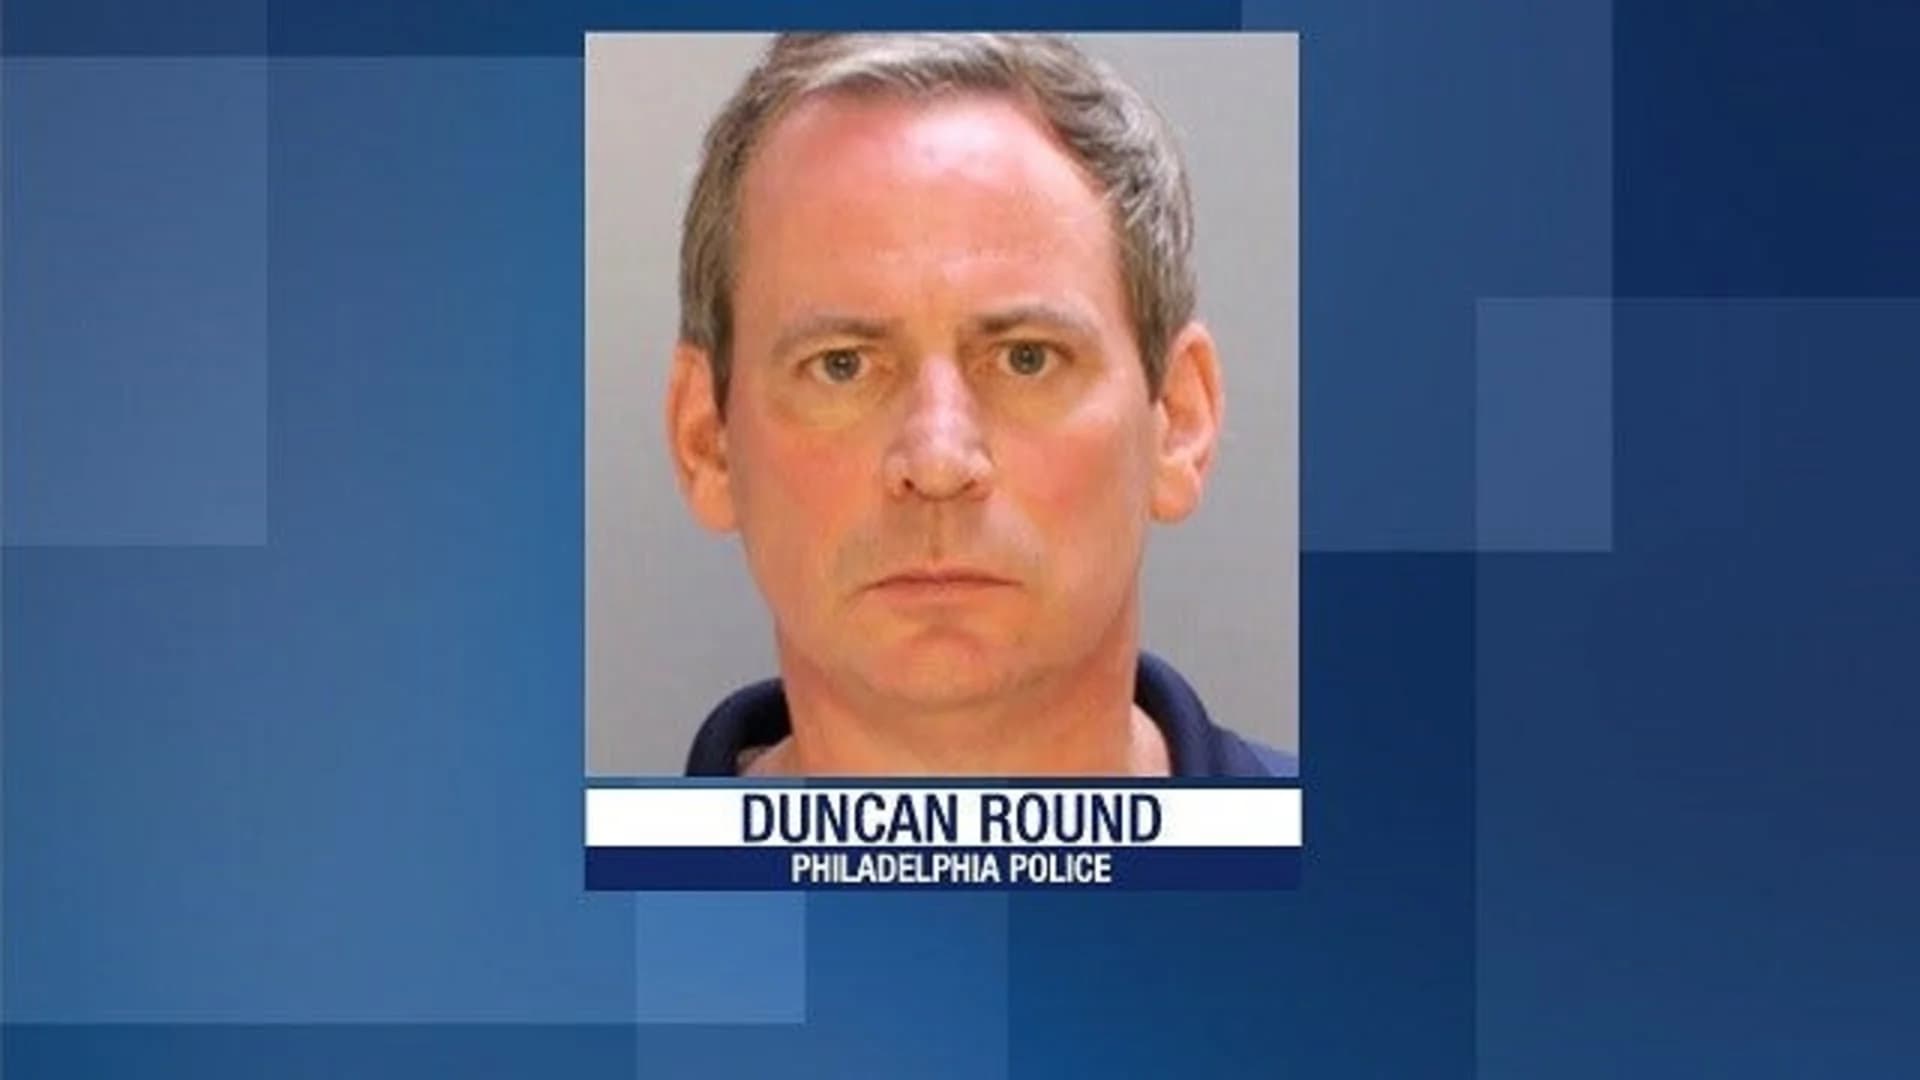 Day care owner accused of sexually assaulting 2 children